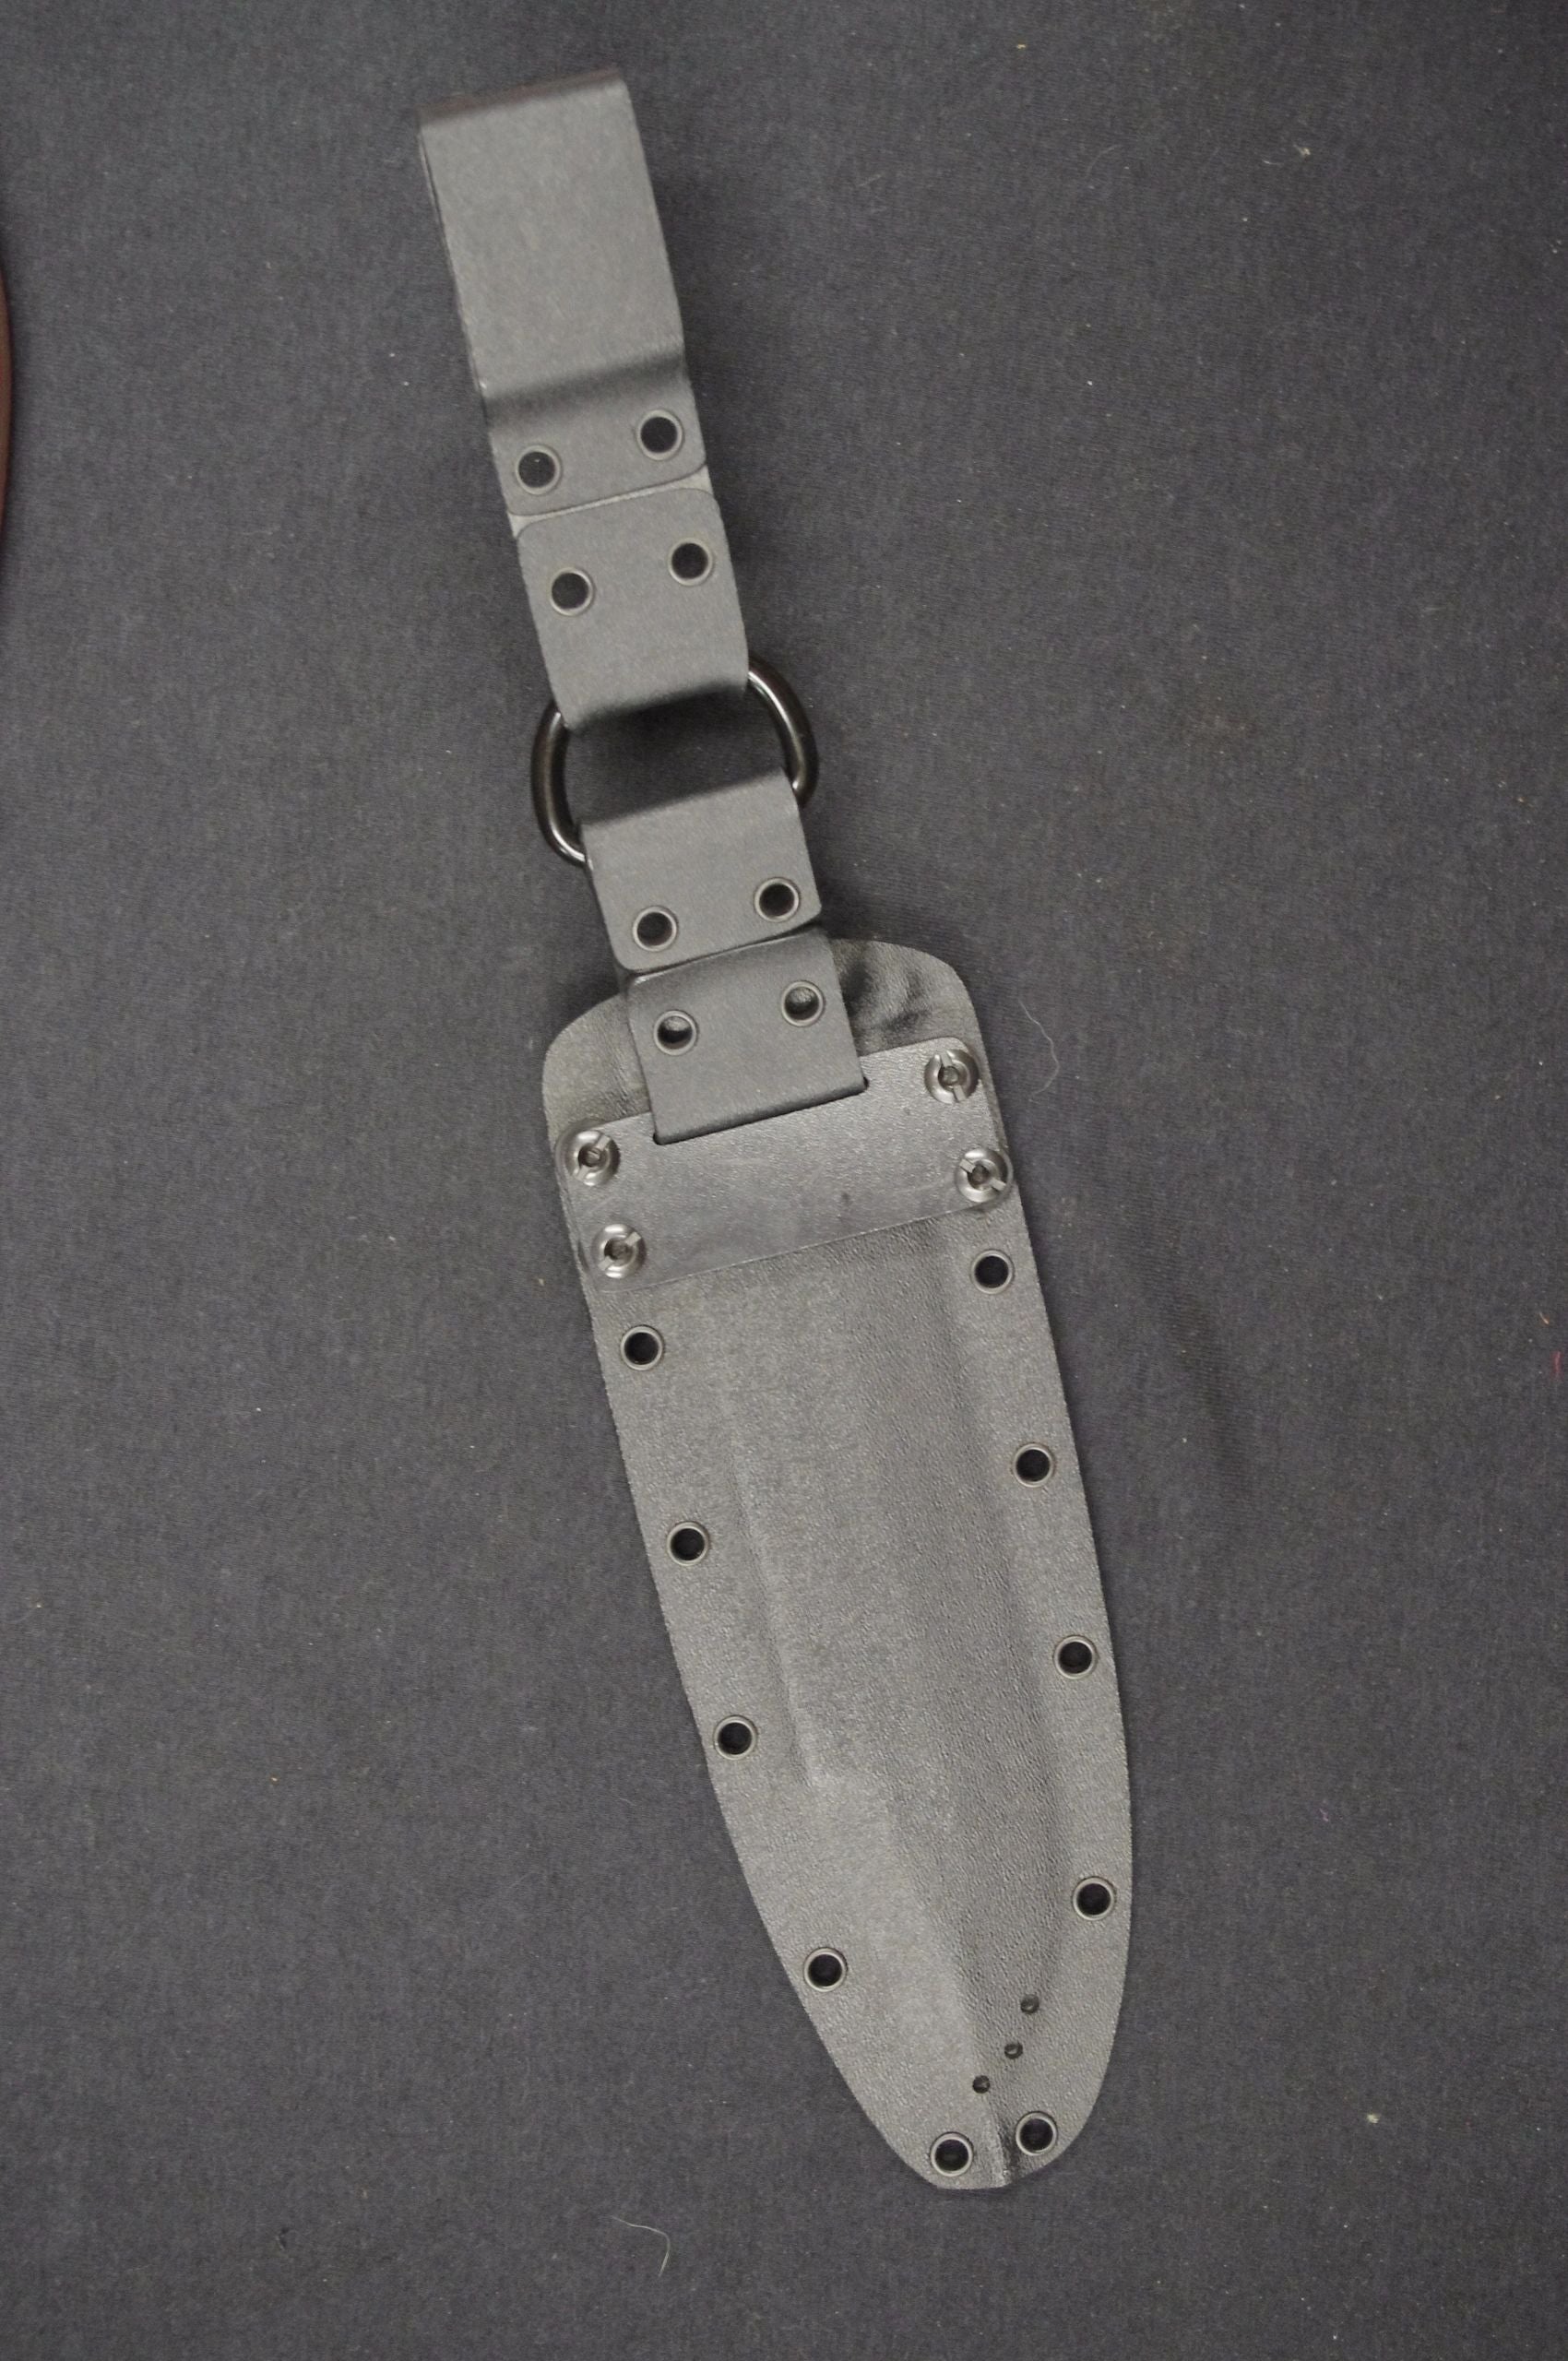 CUSTOM-MADE KYDEX "D" RING DANGLER WITH 2" BELT LOOP ON A CUSTOM MOUNTING PLATE